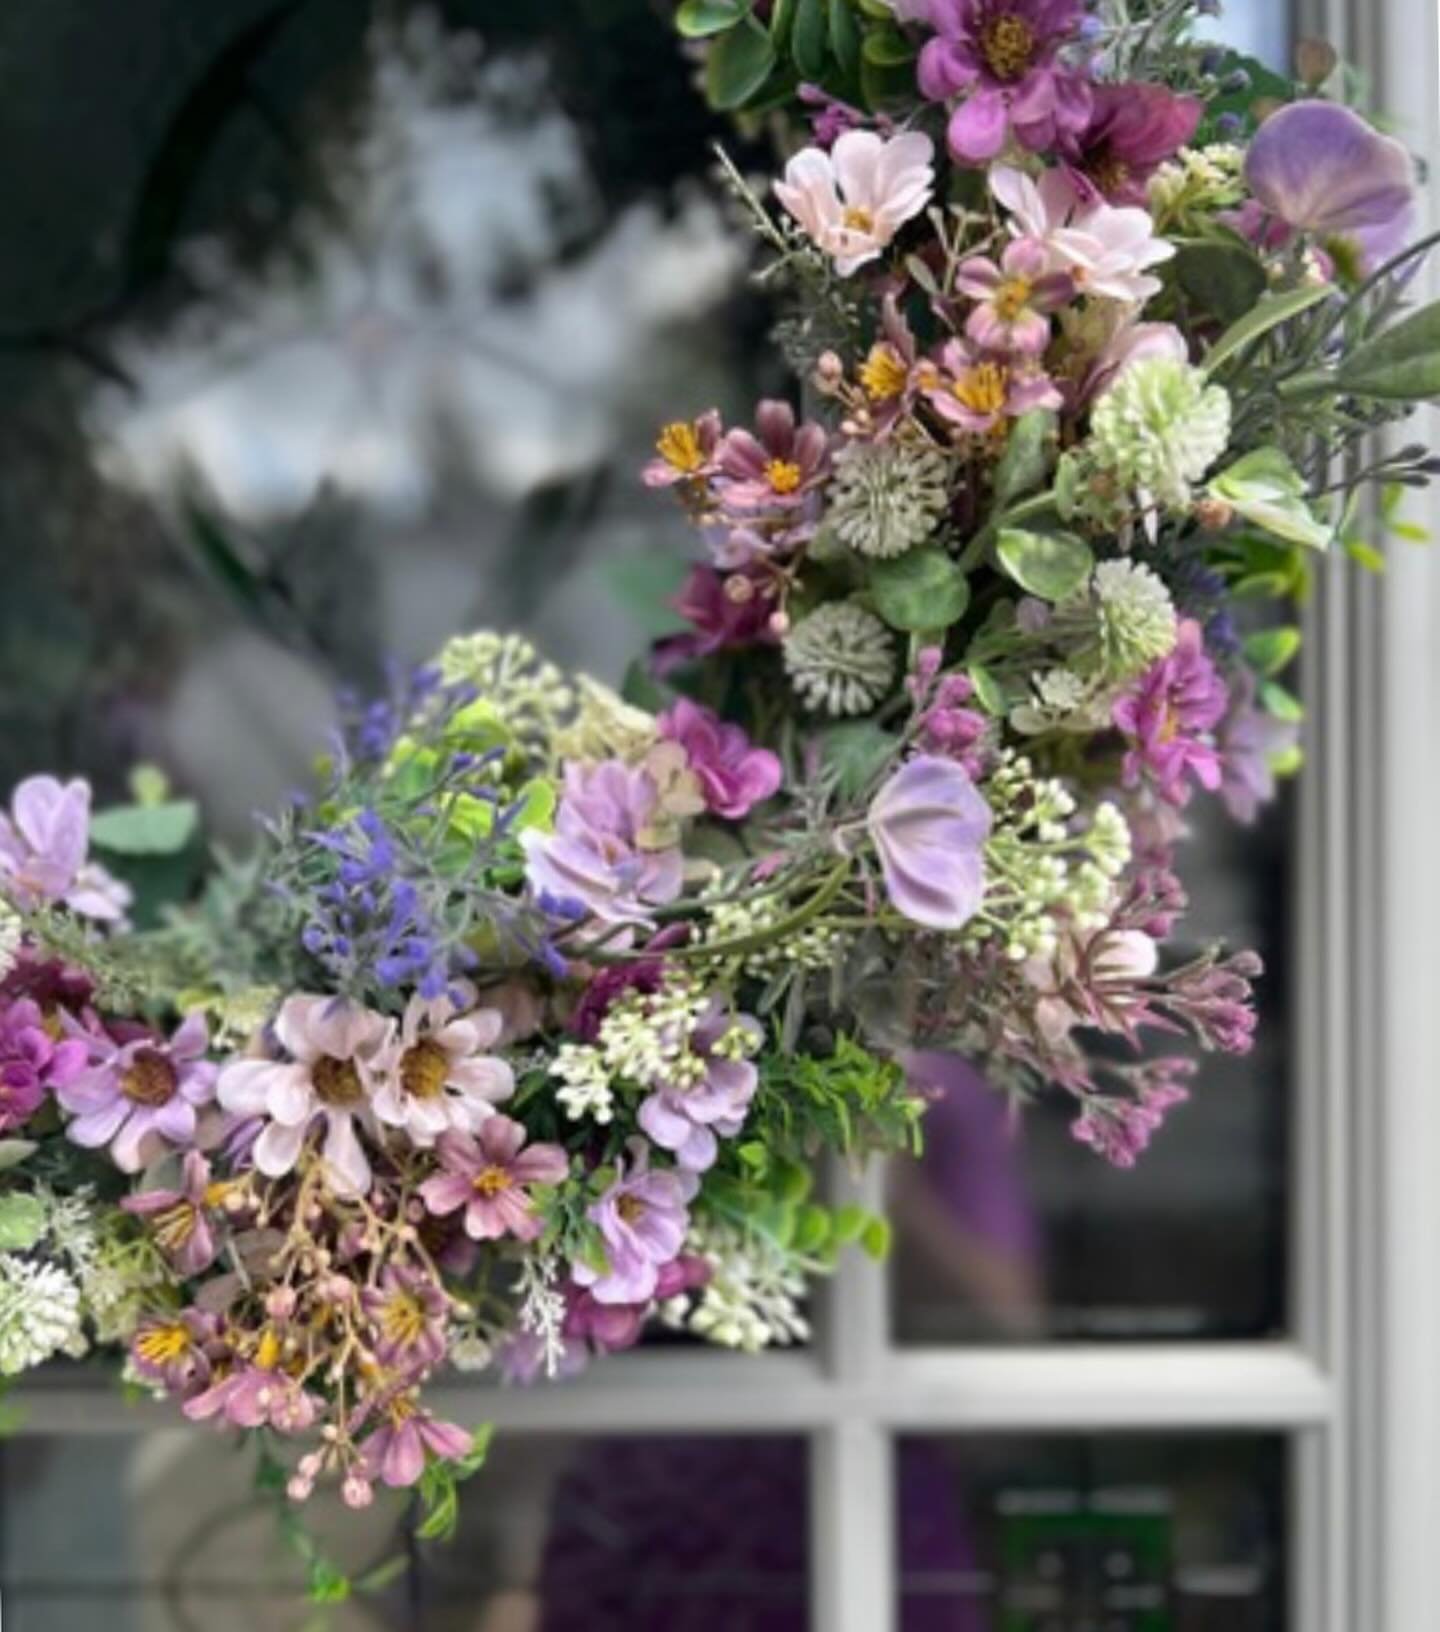 Perfection..
Melissa @littleterracedhouse has just sent me the most beautiful pics of her stunning new front door and spring wildflower lilac wreath. Thank you it looks perfect #wreath #wreathstyling #artificialflowers #springwreaths